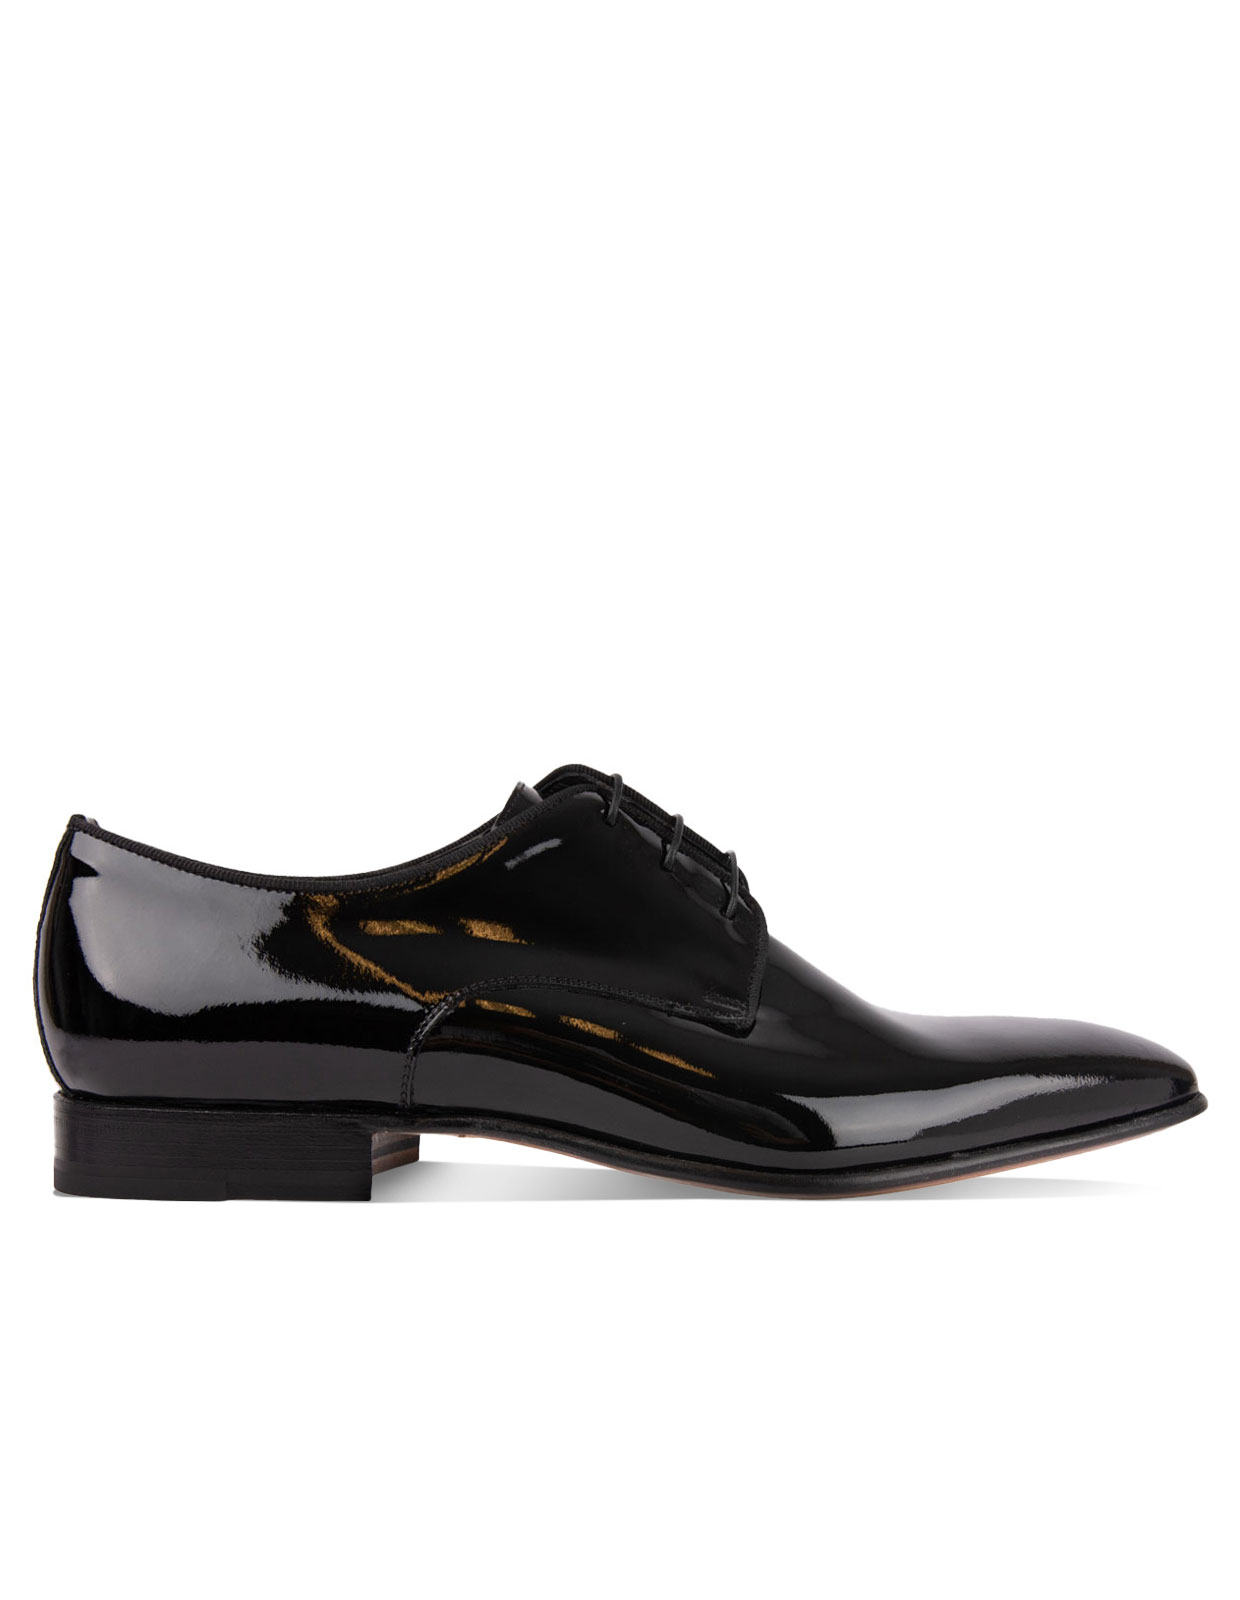 Lille Patent Leather Derby Shoes Black Stl 12